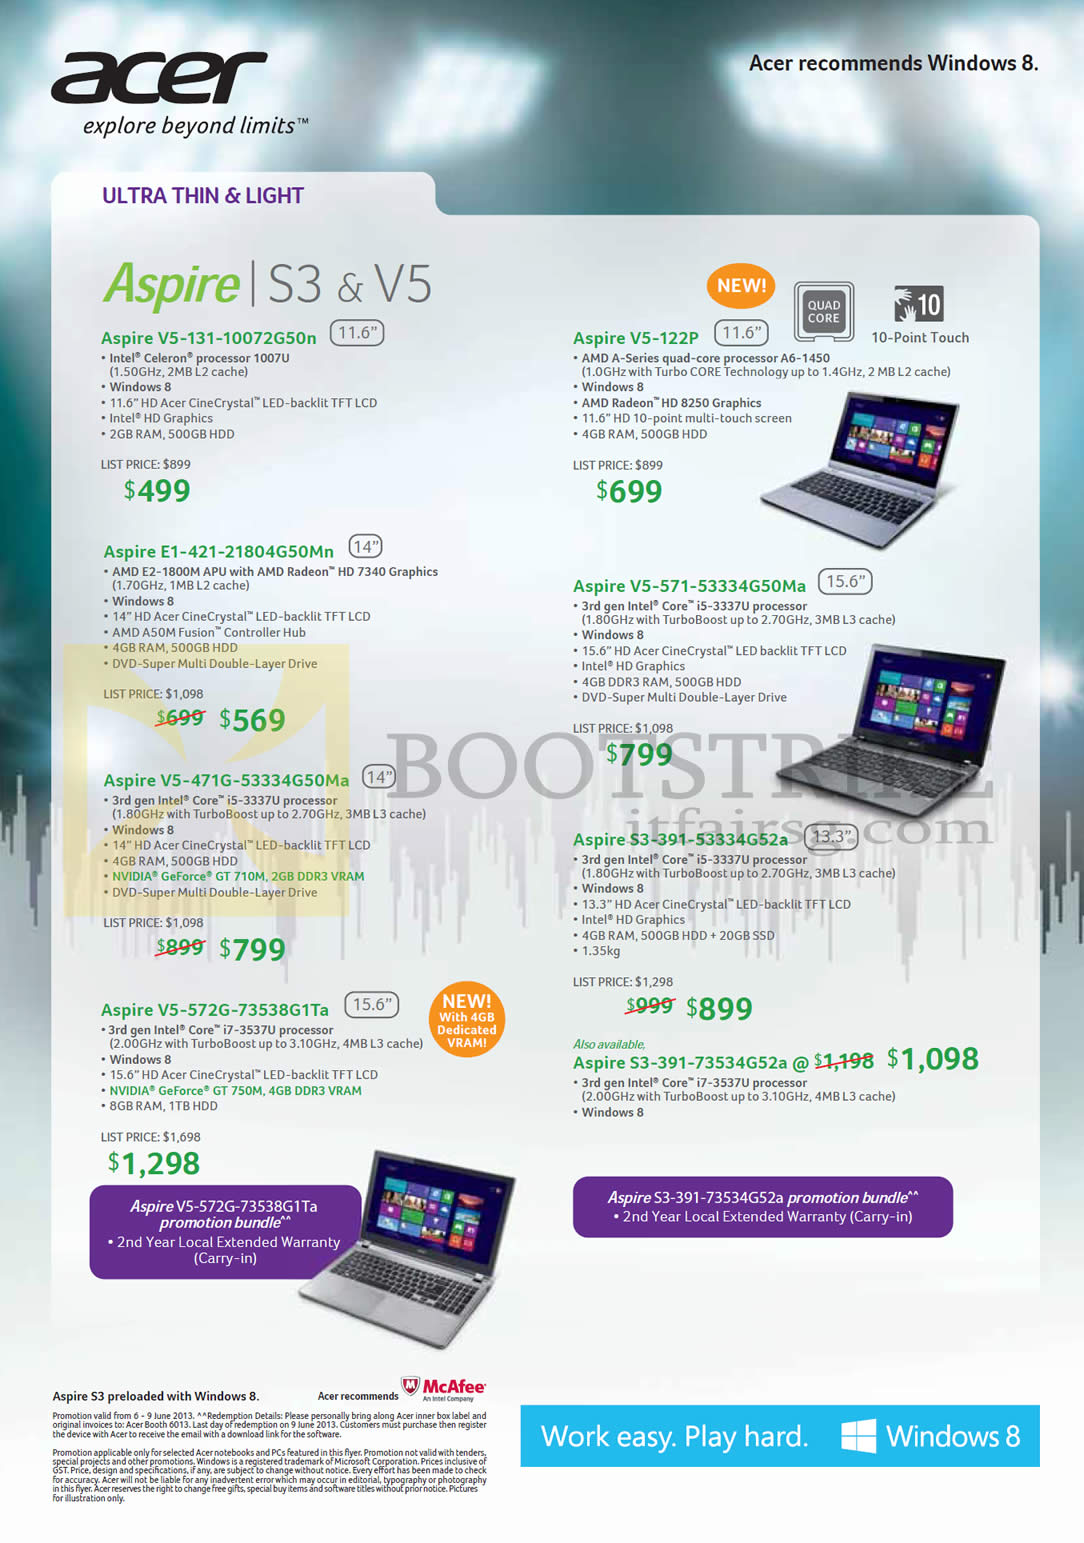 PC SHOW 2013 price list image brochure of Acer Notebooks S3 V5 Aspire V5-131-10072G50n, V5-122P, V5-571-53334G50Ma, E1-421-21804G50Mn, V5-471G-53334G50Ma, S3-391-S3334G52a, V5-572G-73538G1Ta